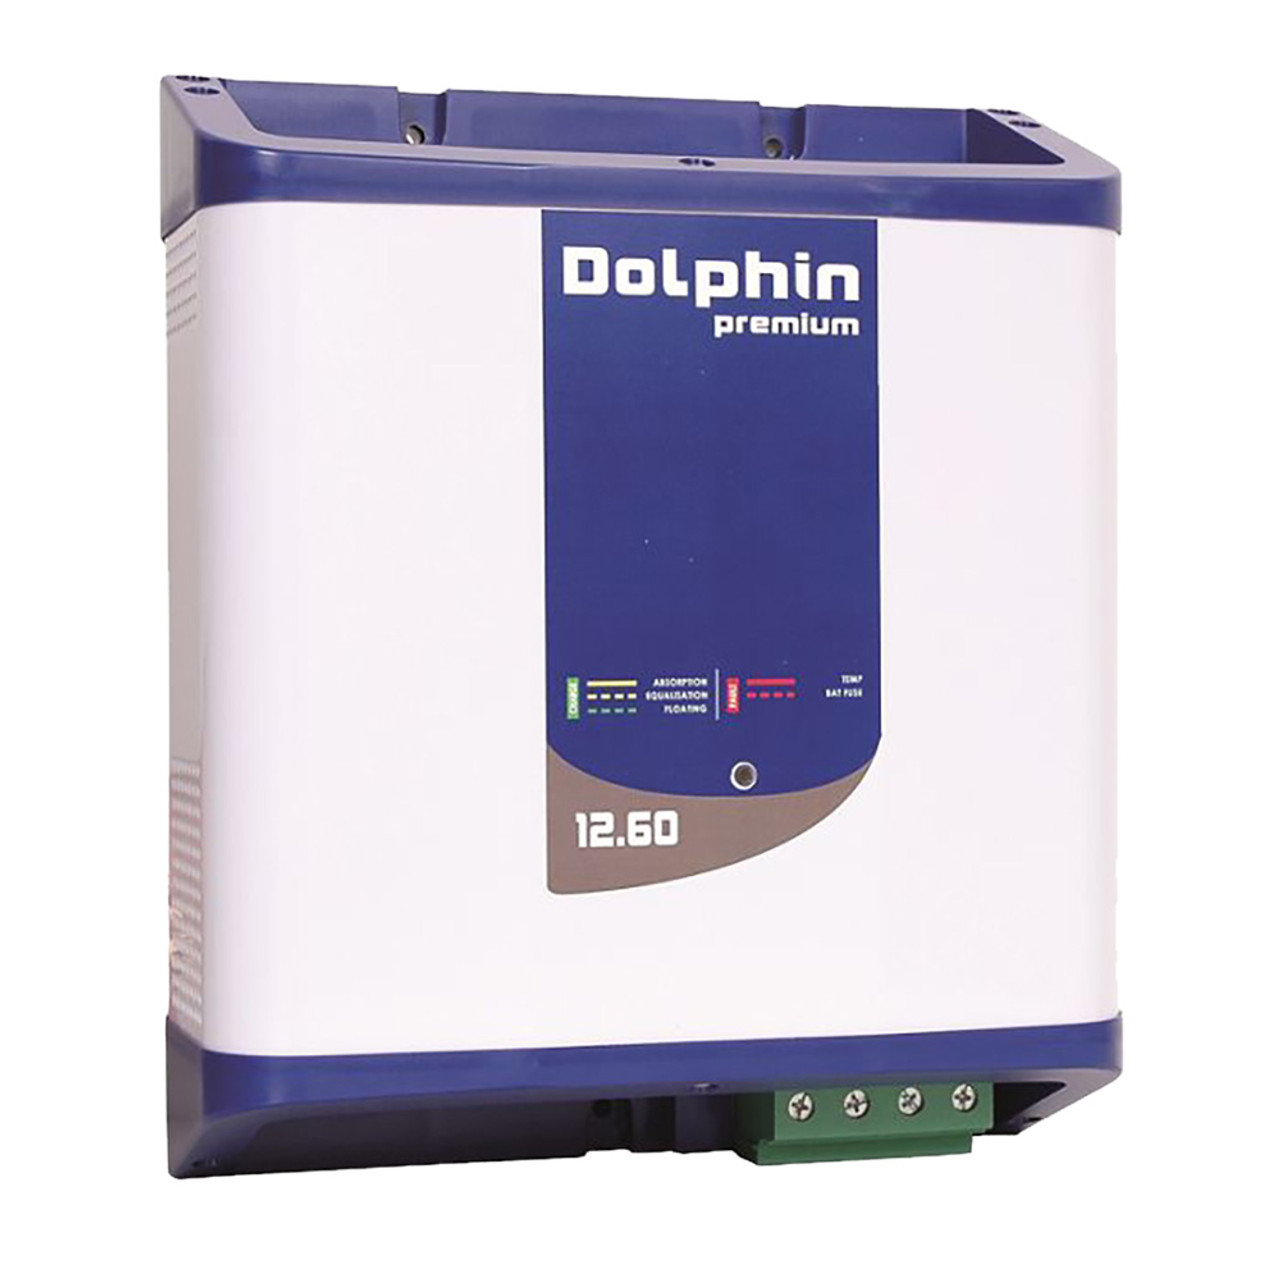 Scandvik Premium Series Dolphin Battery Charger - 12V, 60A, 110\/220VAC - 3 Outputs [99050]